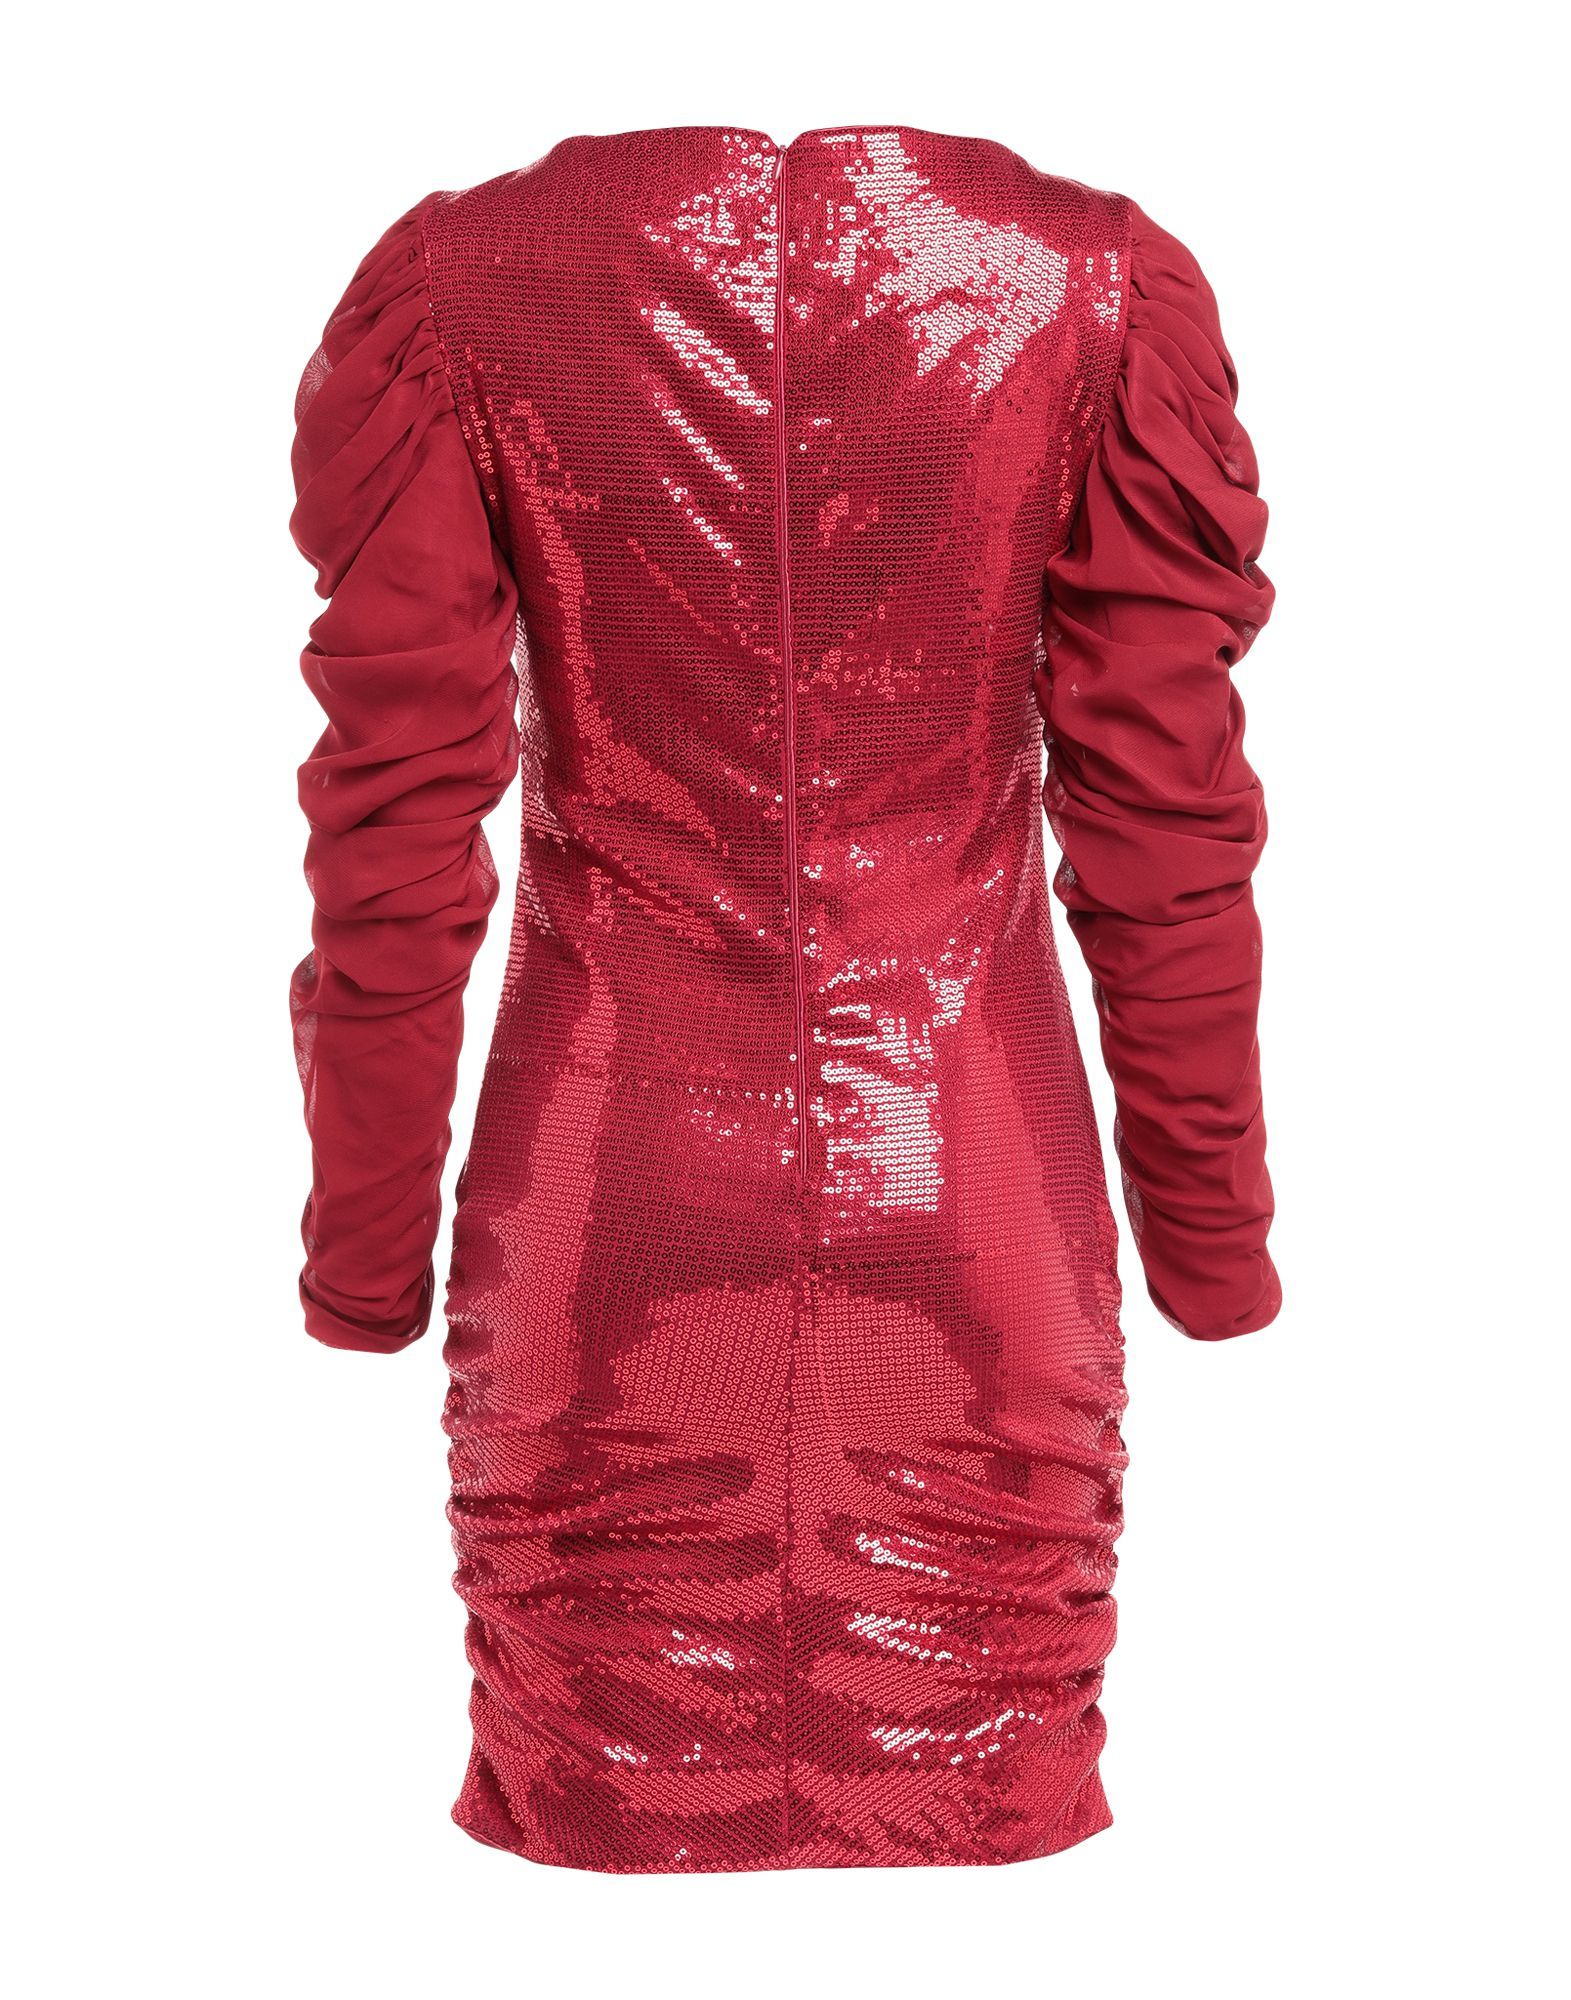 crepe, sequins, basic solid colour, round collar, long sleeves, no pockets, rear closure, zipper closure, fully lined, stretch